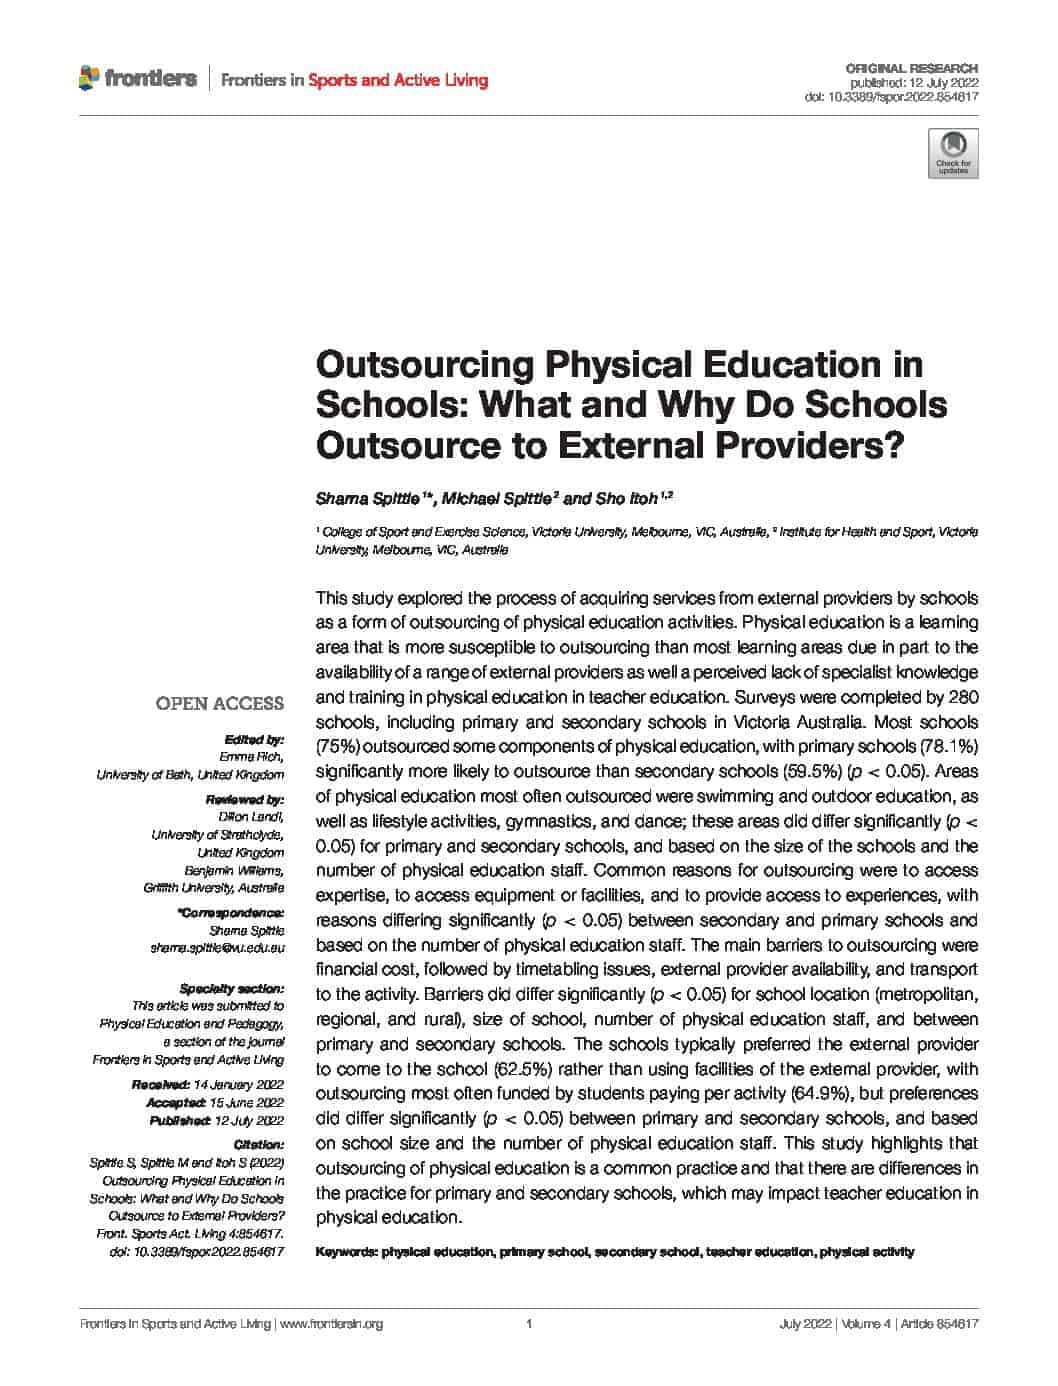 Outsourcing Physical Education in Schools: What and Why Do Schools Outsource to External Providers?